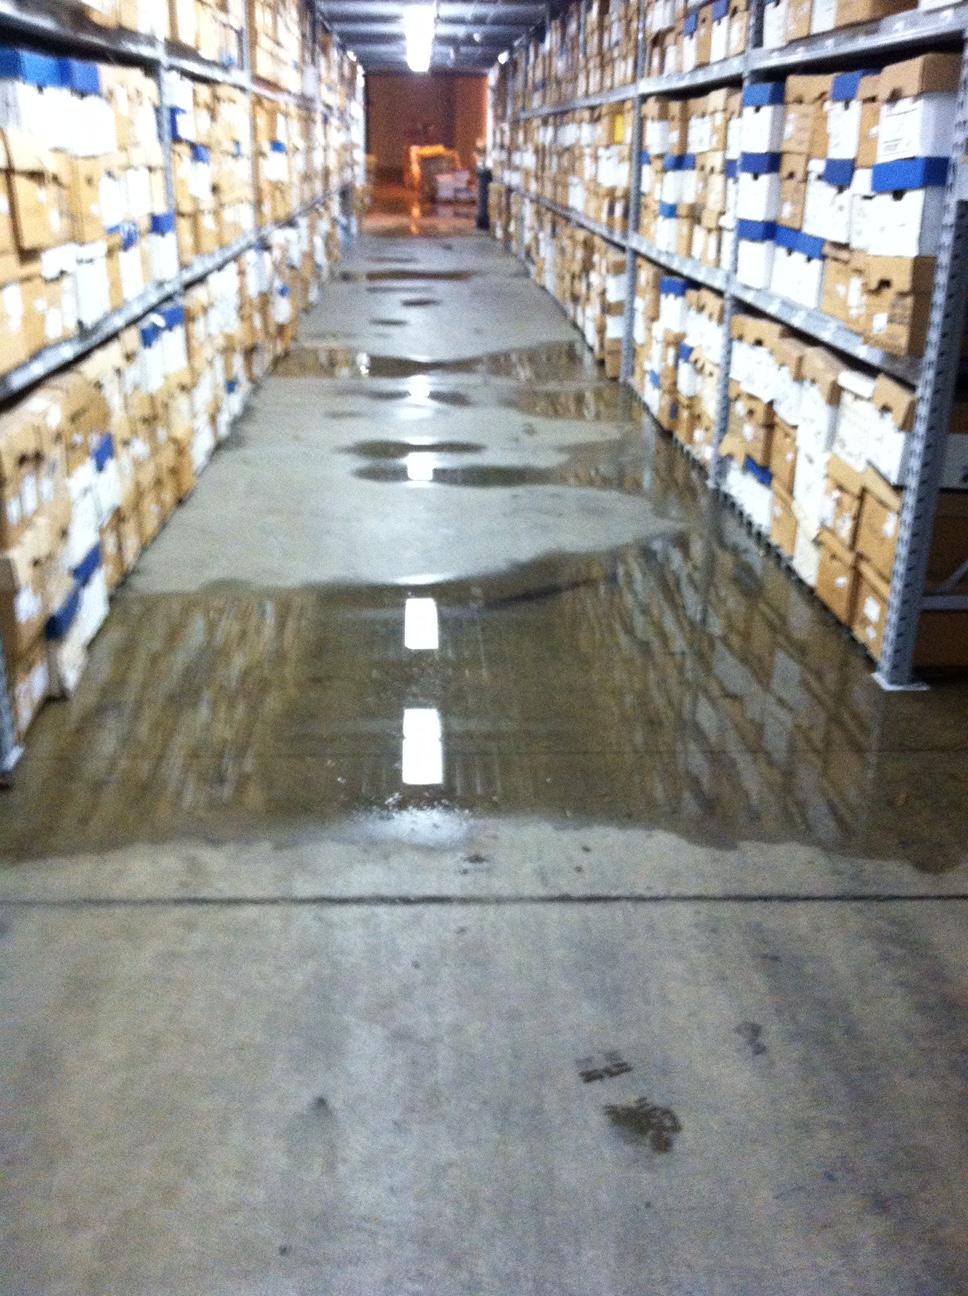 Working on a large commercial water loss!